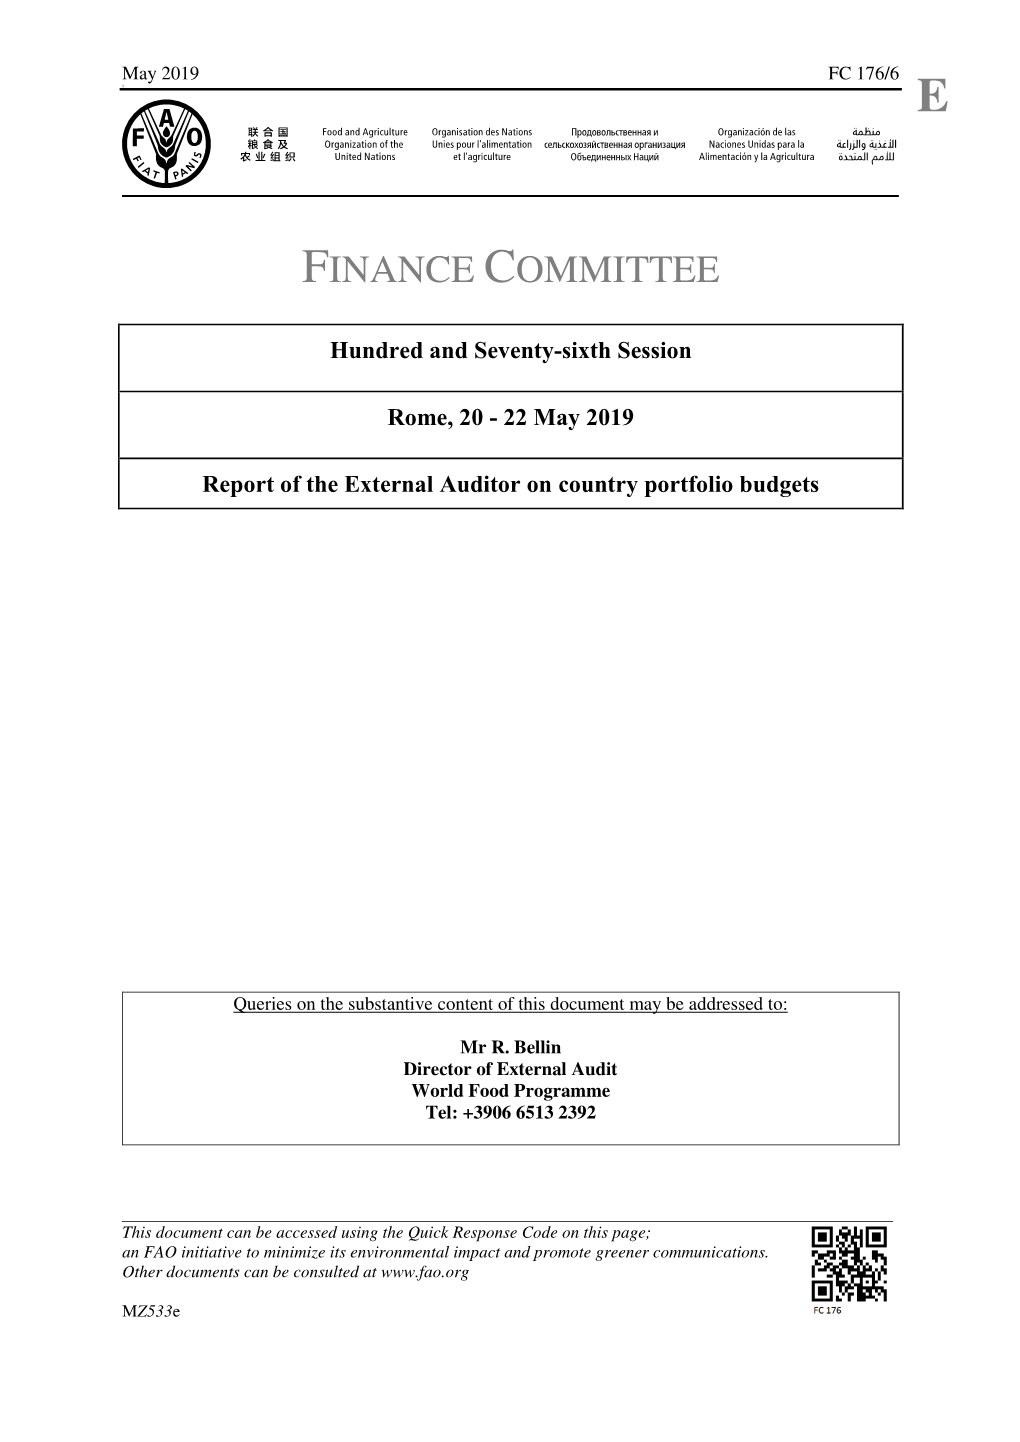 Report of the External Auditor on Country Portfolio Budgets